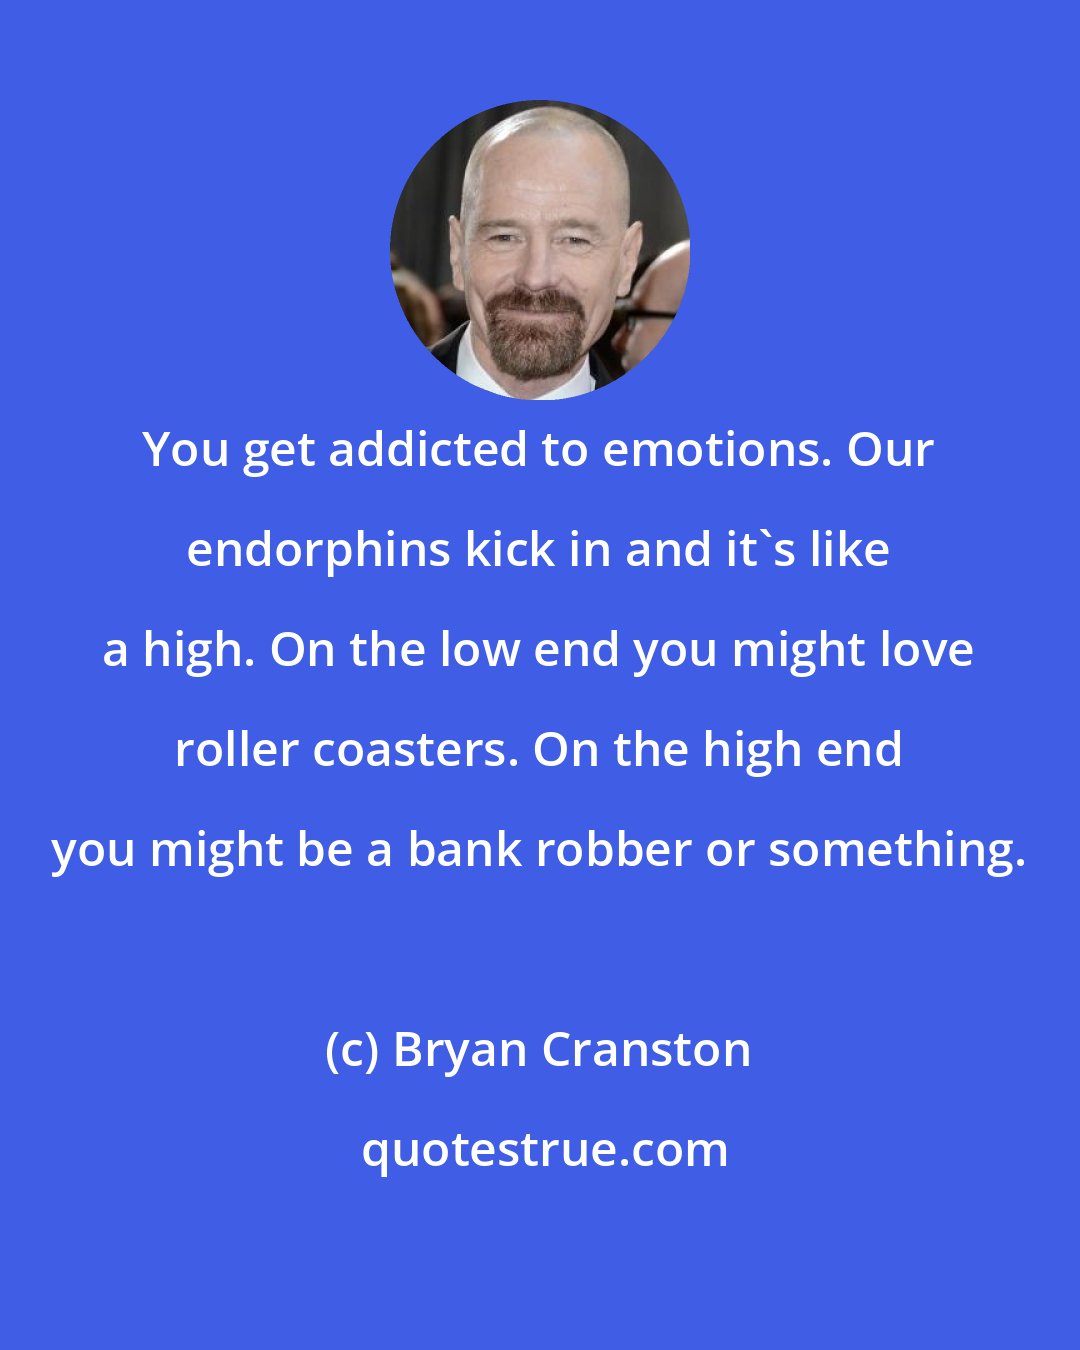 Bryan Cranston: You get addicted to emotions. Our endorphins kick in and it's like a high. On the low end you might love roller coasters. On the high end you might be a bank robber or something.